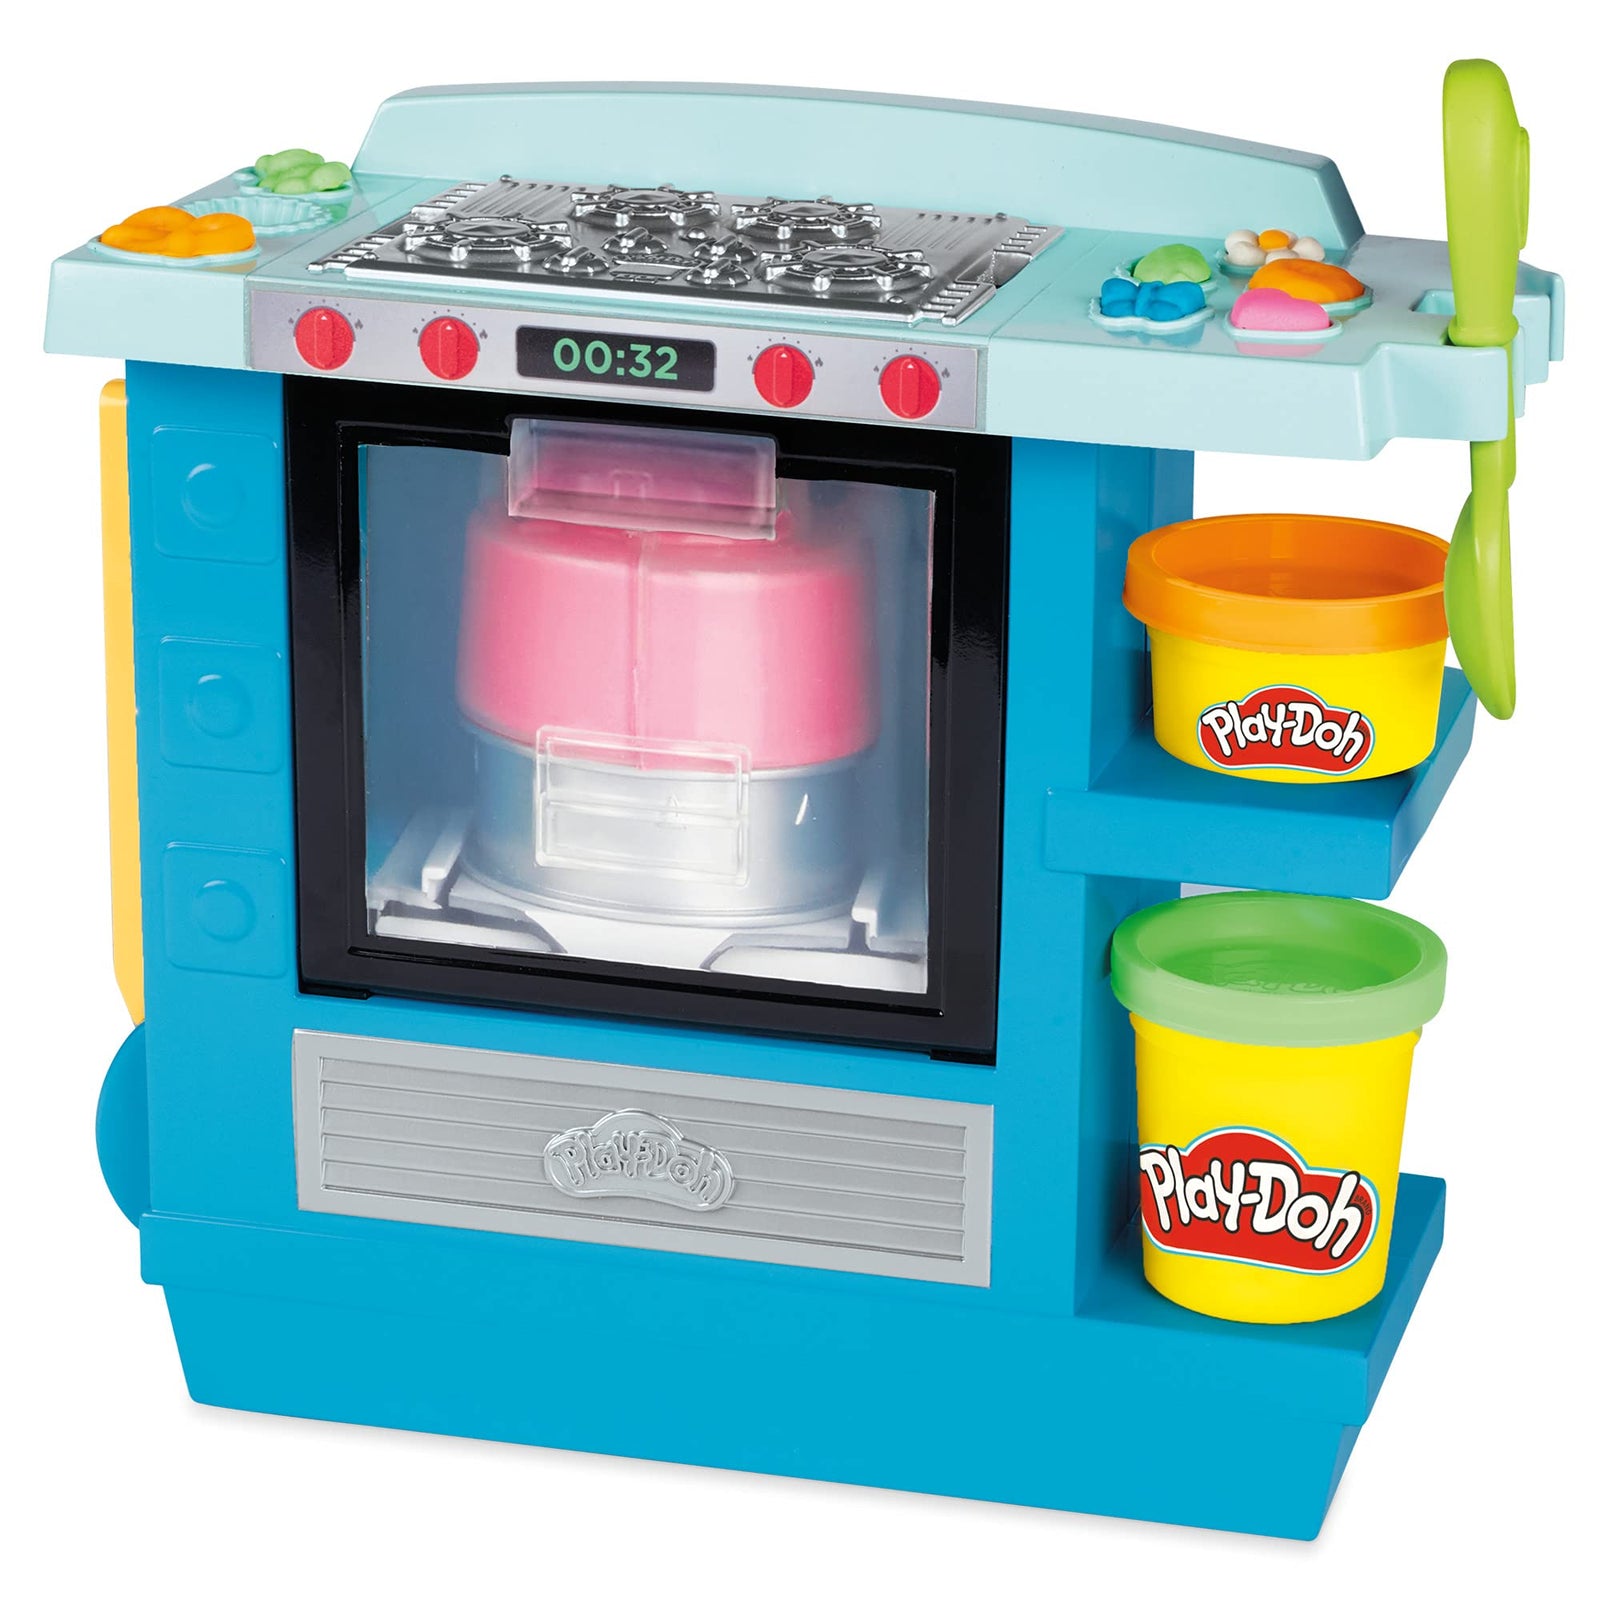 Play-Doh Kitchen Creations Rising Cake Oven Bakery Playset for Kids 3 Years and Up with 5 Modeling Compound Colors, Non-Toxic